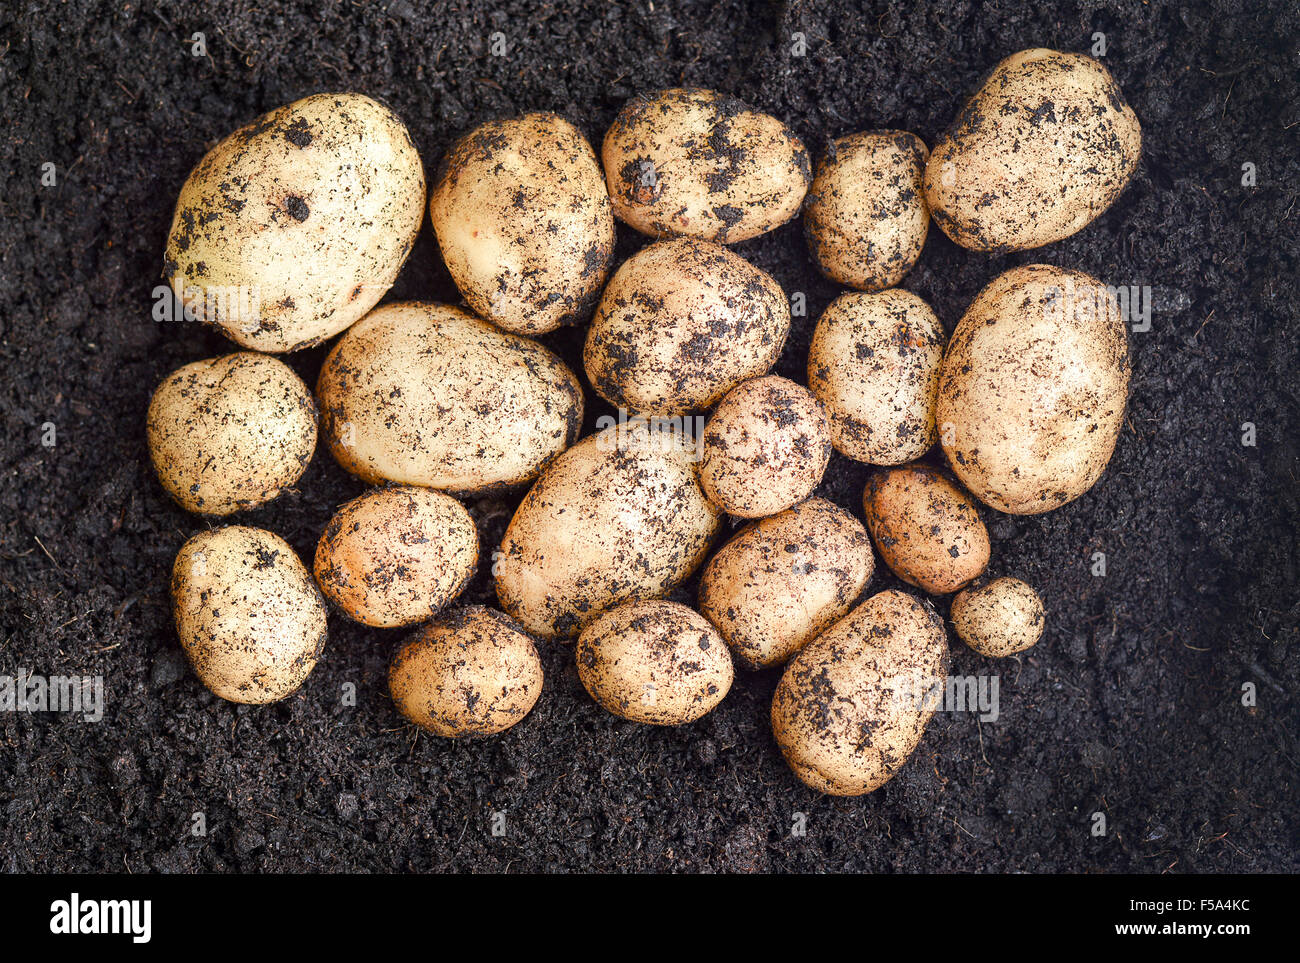 Freshly lifted organic potatoes grown in a garden  in dark rich soil, unwashed selected focus, narrow depth of field Stock Photo